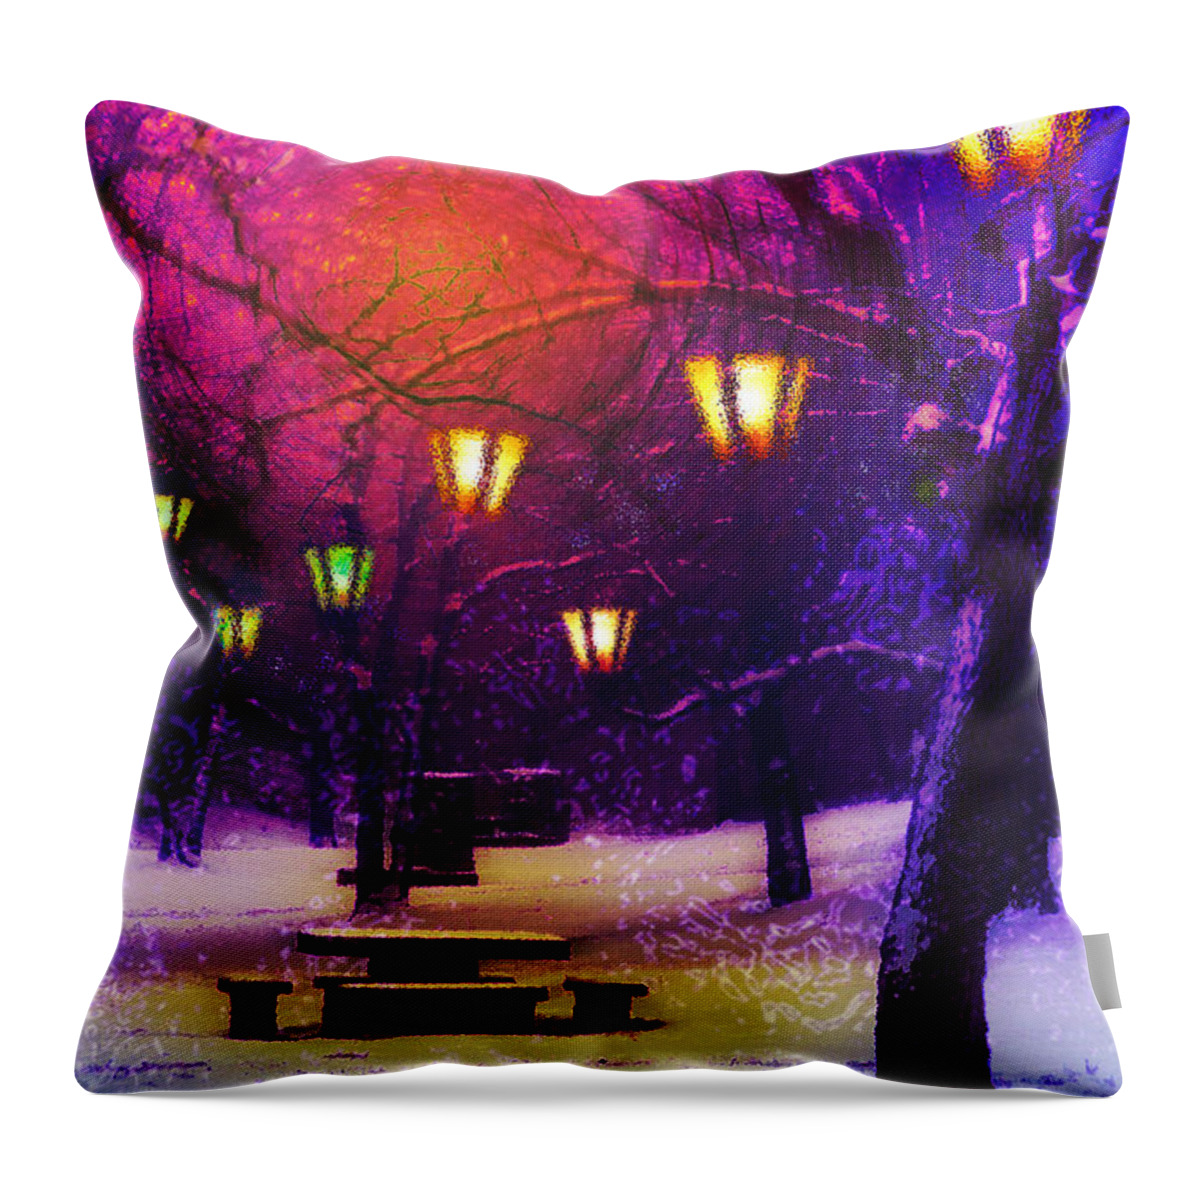 Picnic Throw Pillow featuring the digital art Magical Times by Kathy Besthorn